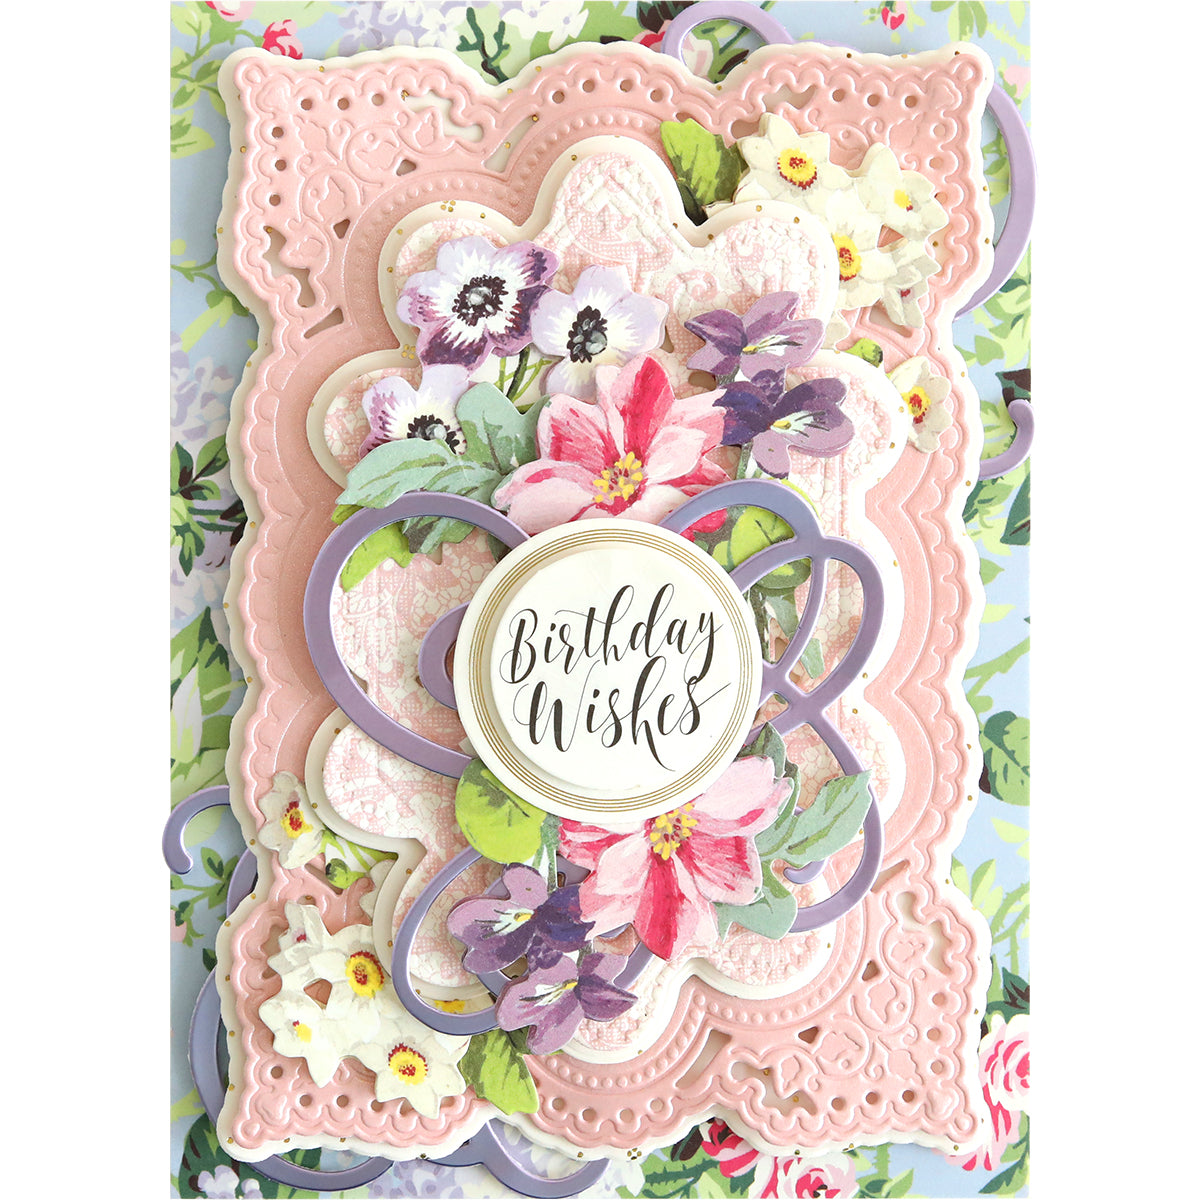 A fancy Flourish Die Bundle with decorative details, perfect for cardmaking projects, featuring pink and white flowers.